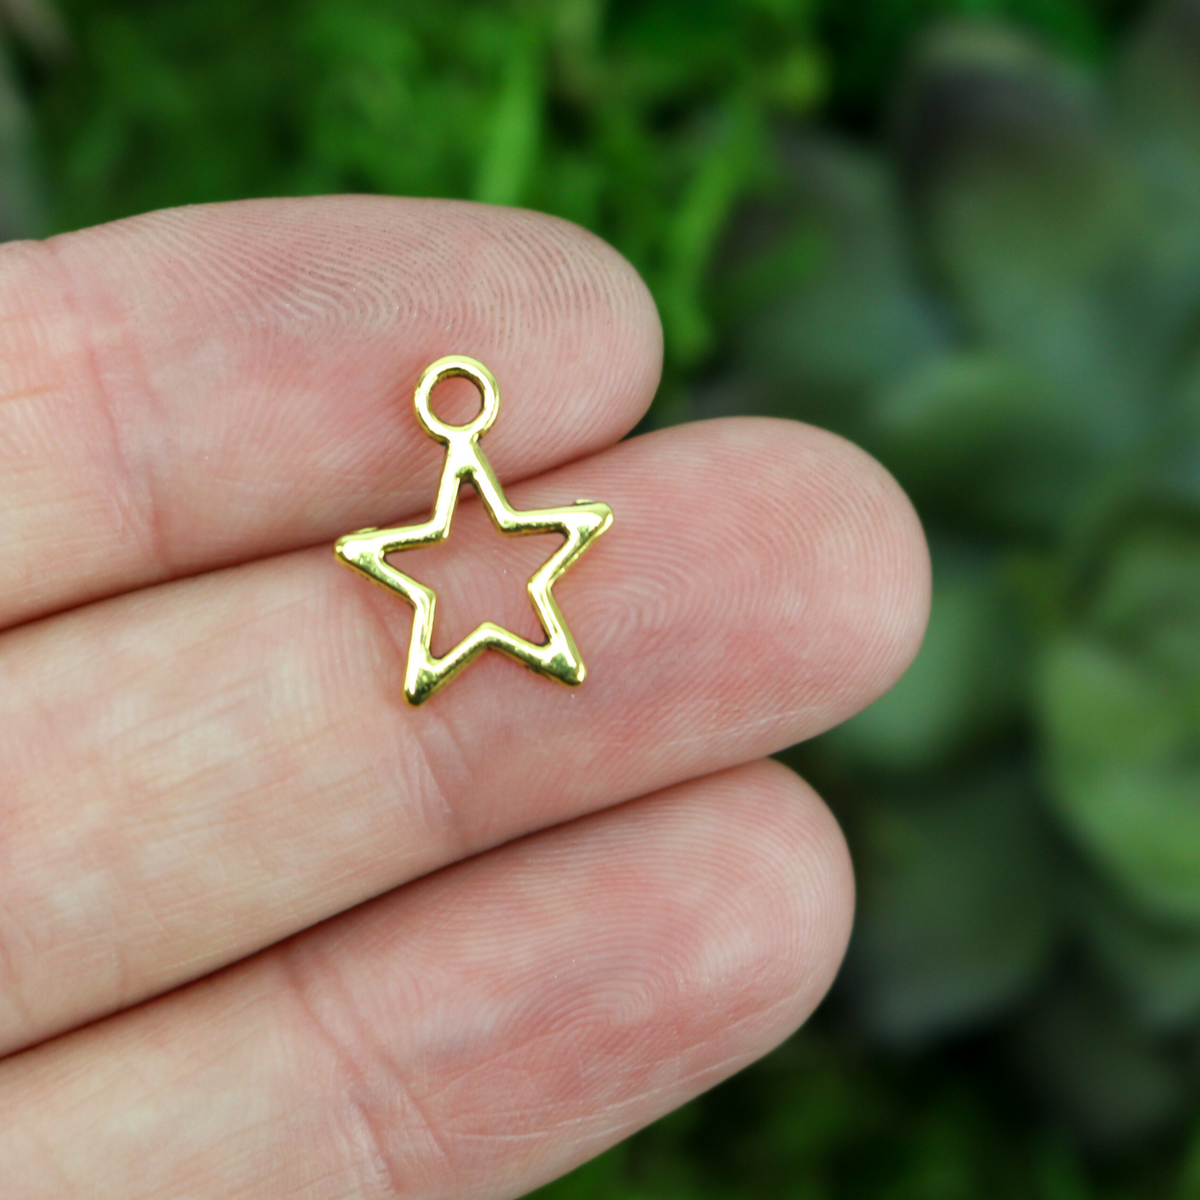 Star Shaped Charms  Jewelry Making Supplies – Small Devotions